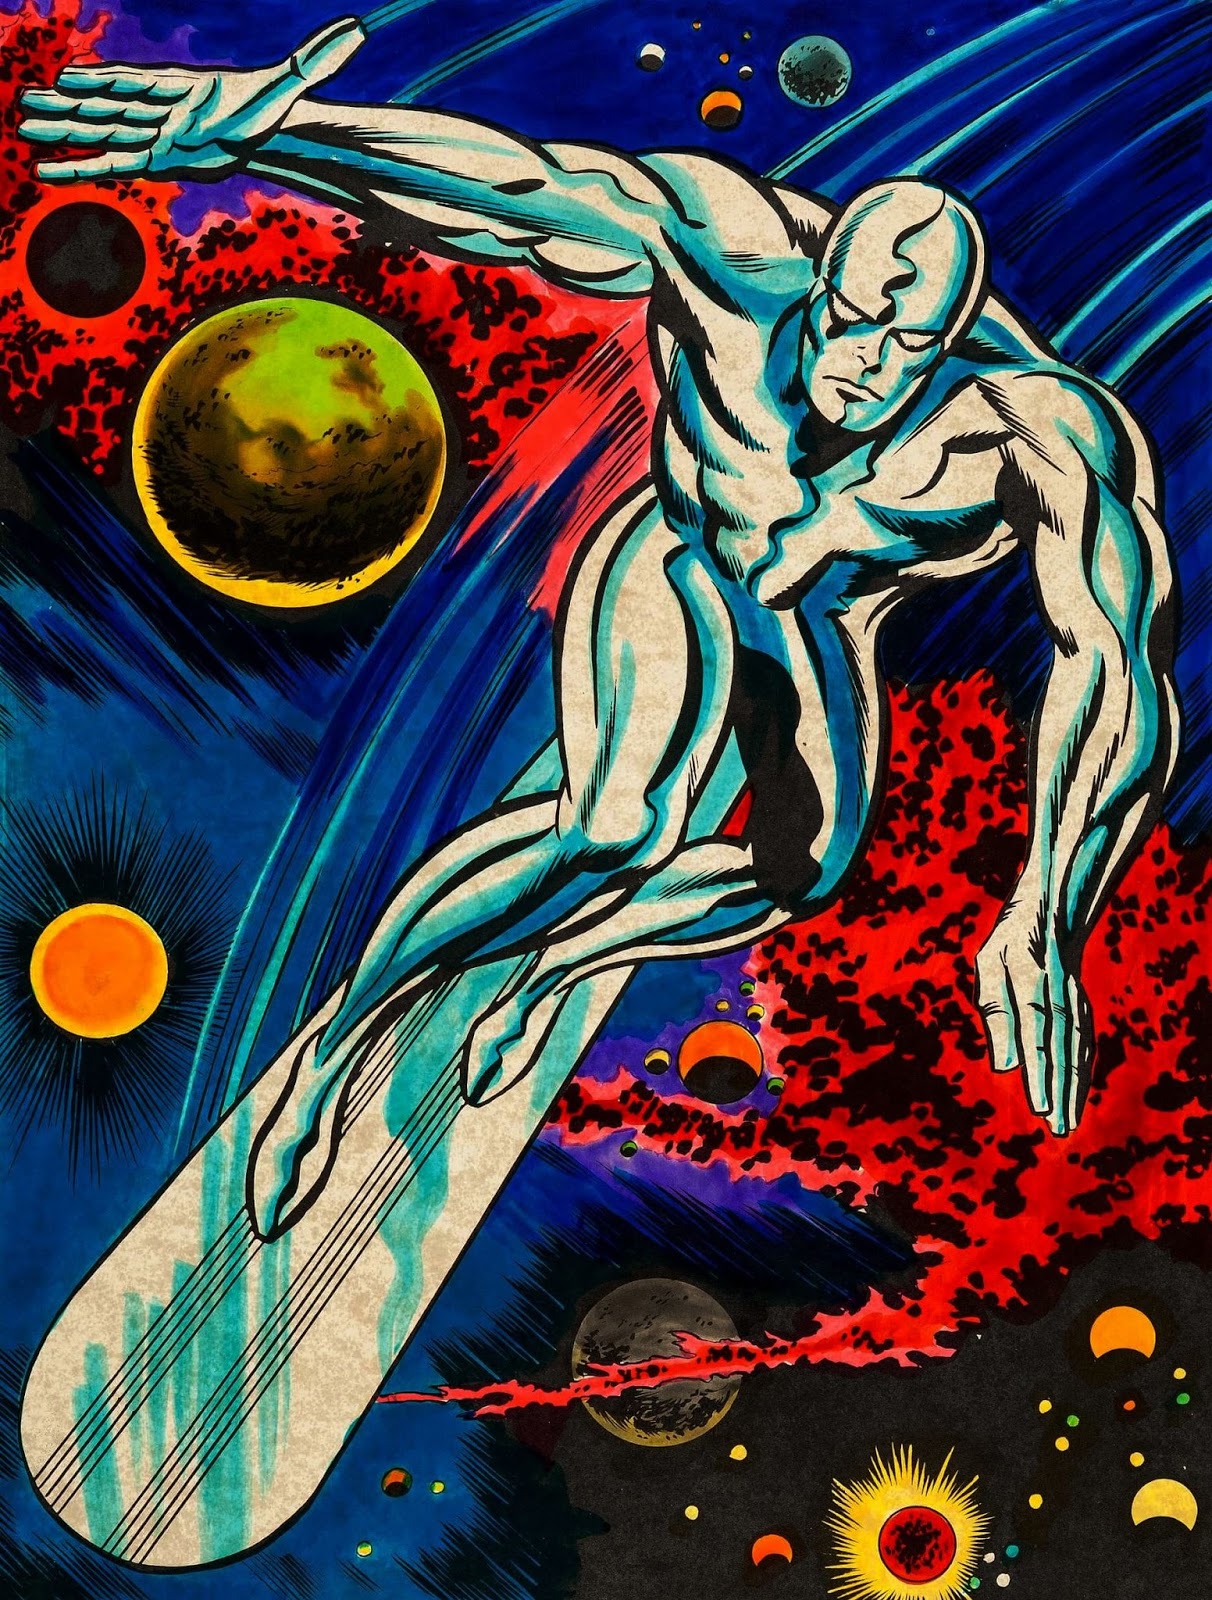 Silver Surfer in space, art by Jack Kirby